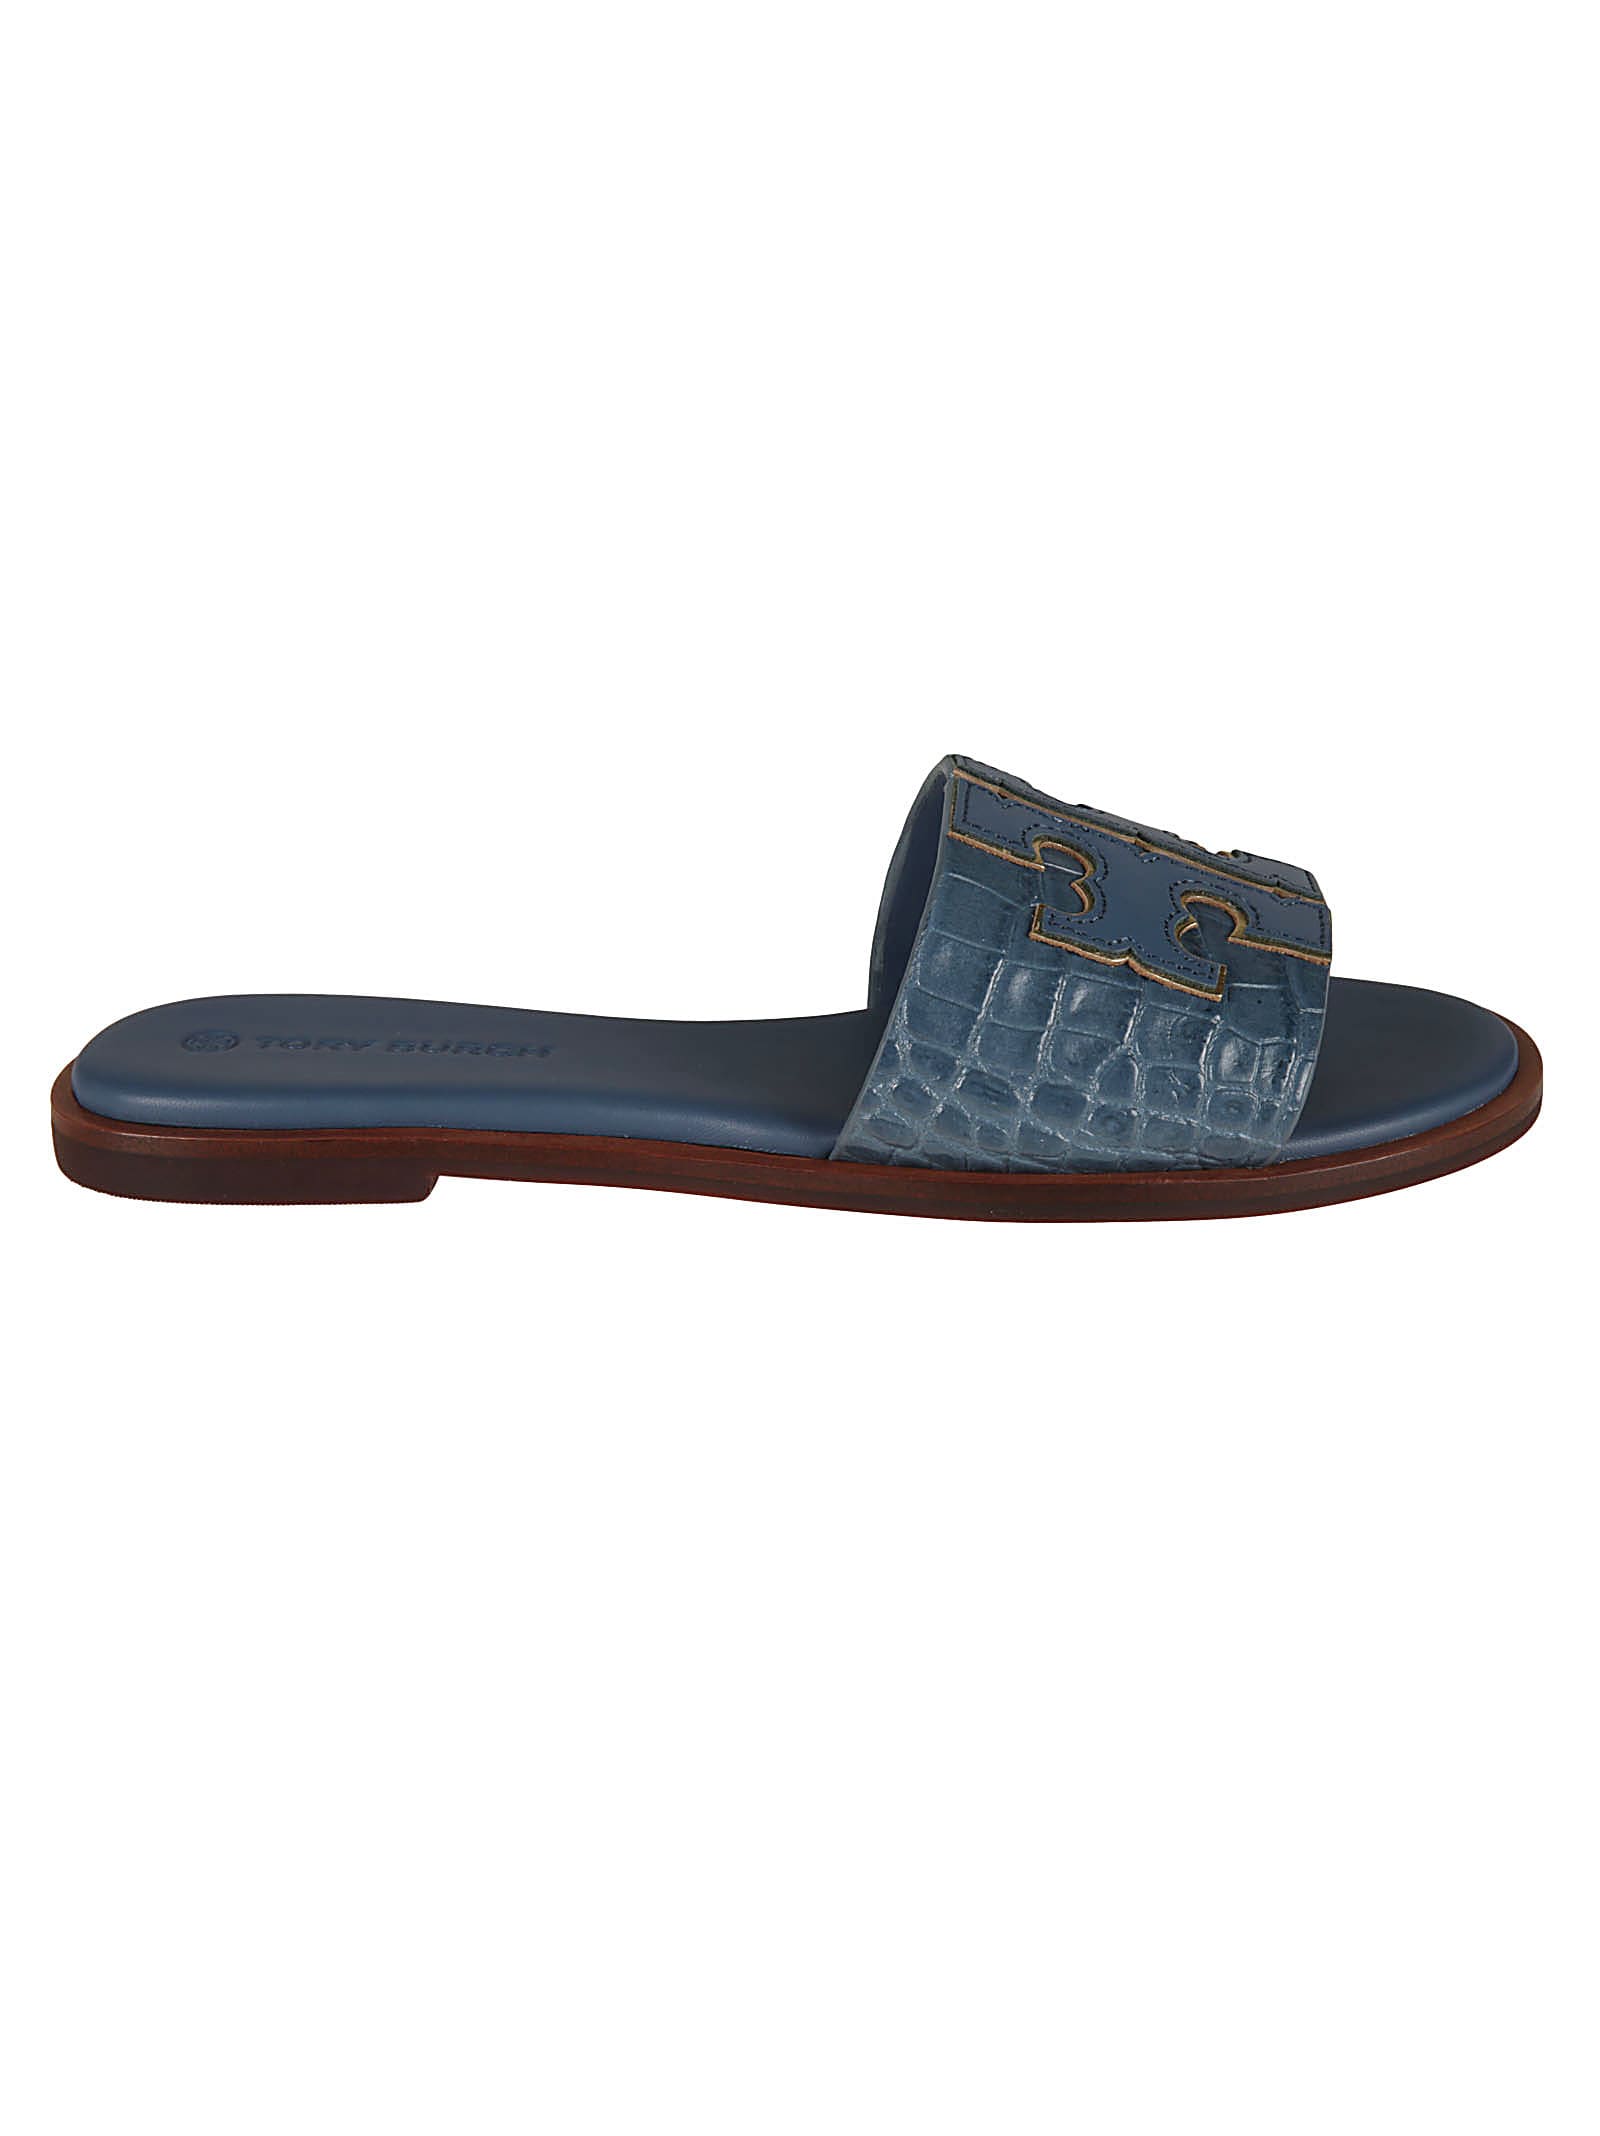 Buy Tory Burch Croco Embossed Ines Sliders online, shop Tory Burch shoes with free shipping